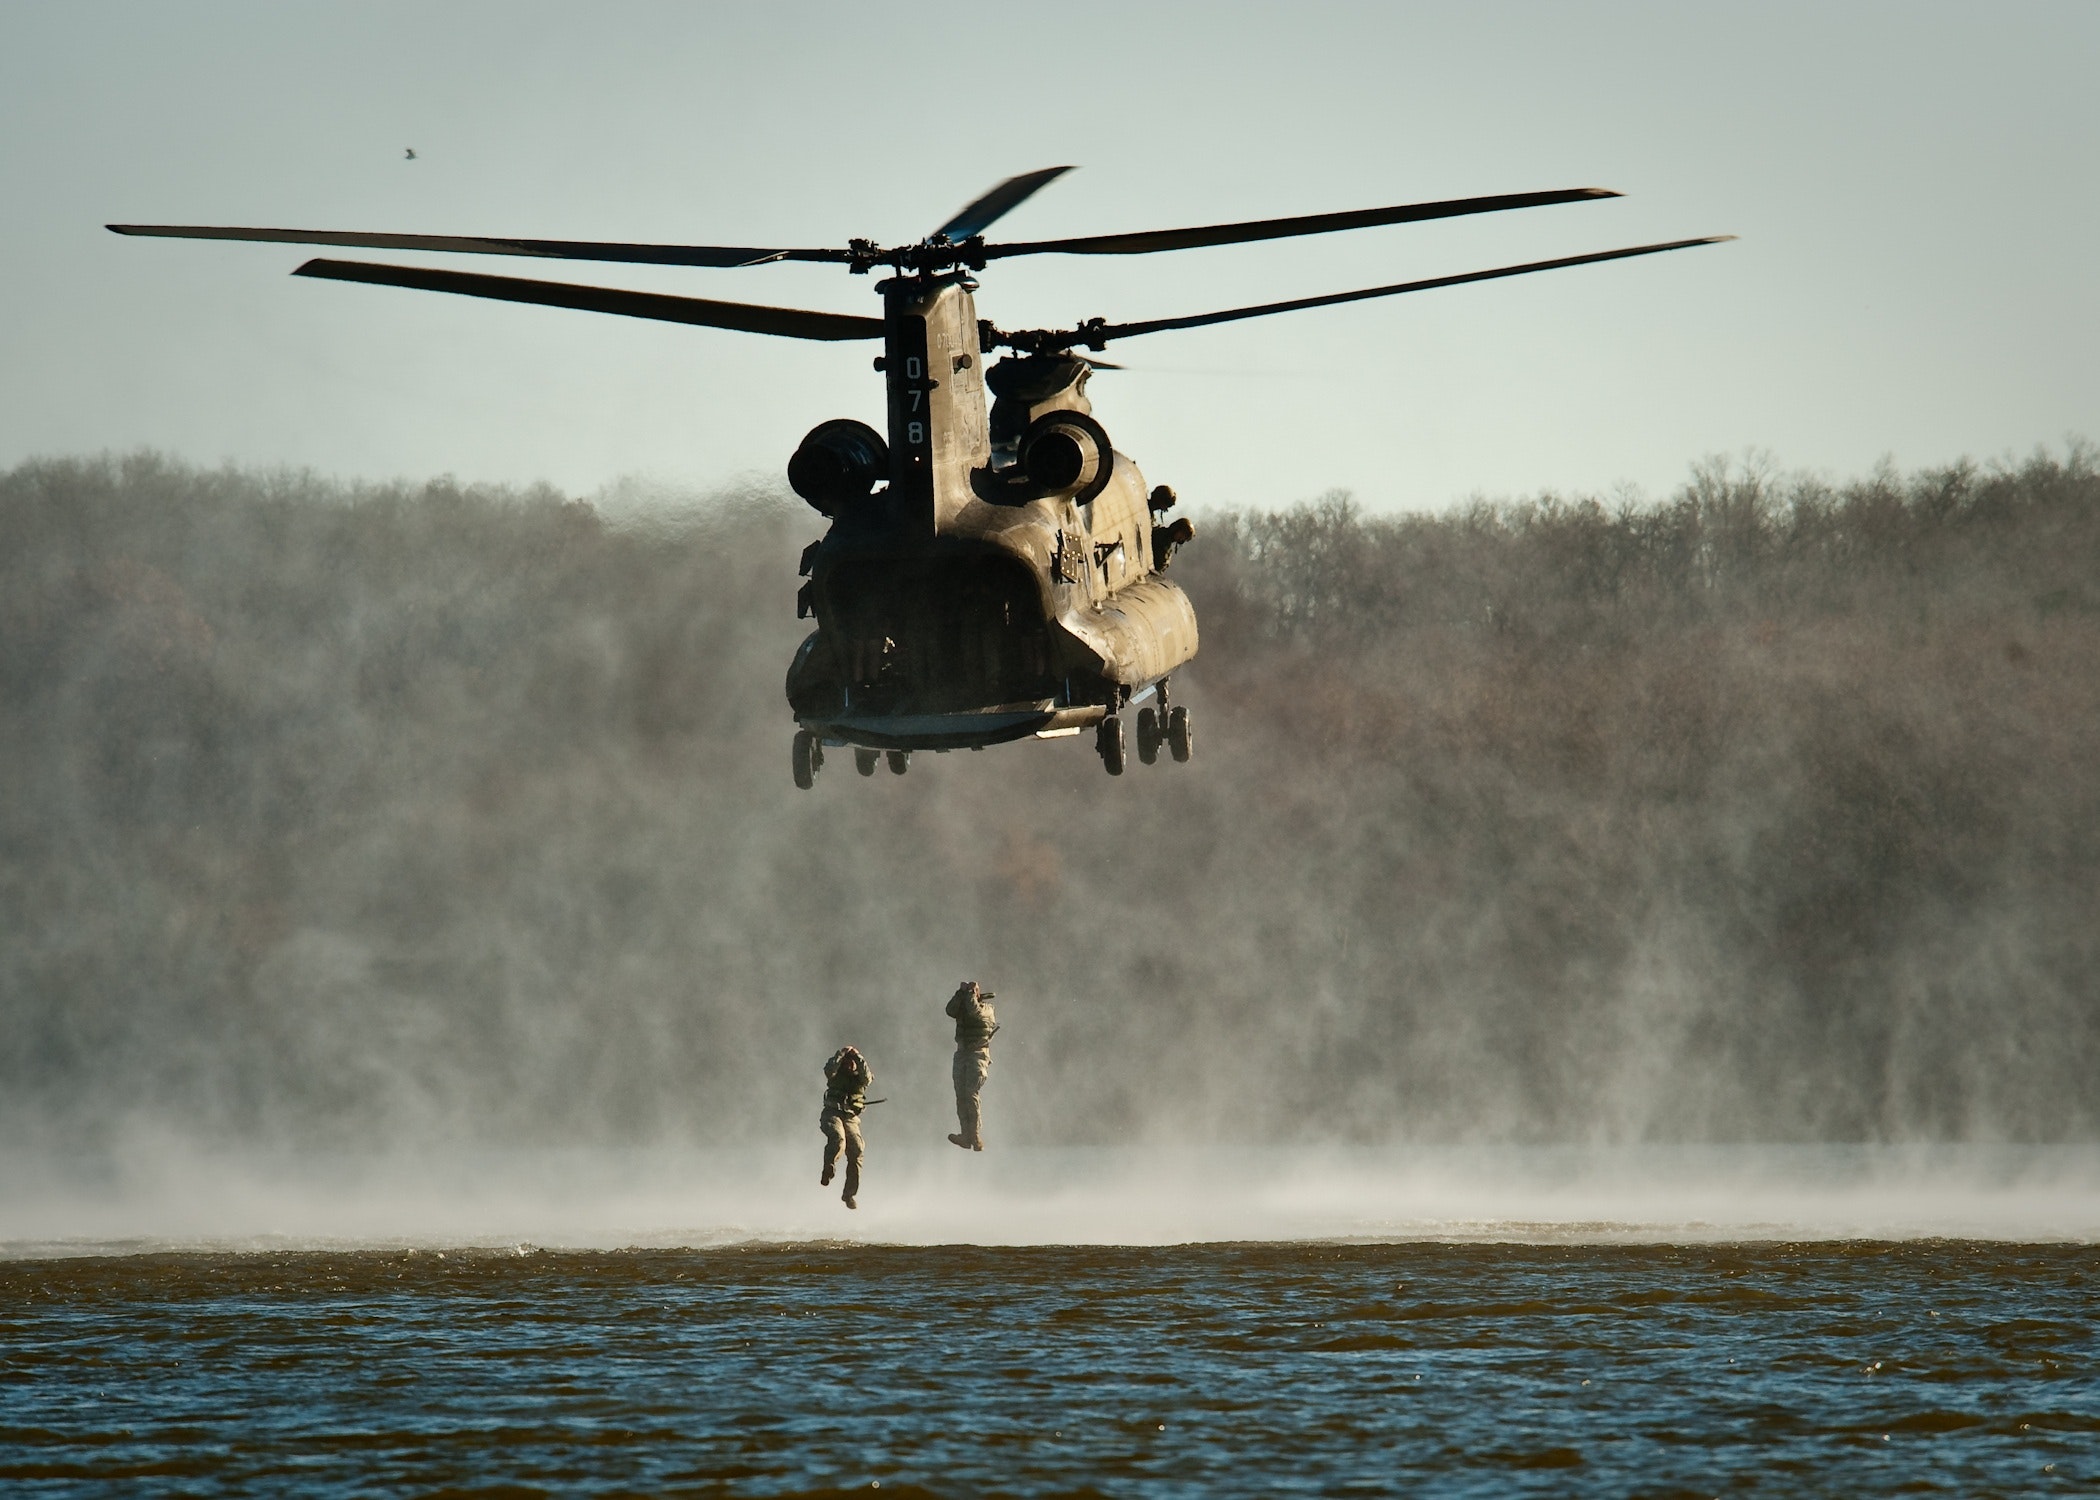 Gray helicopter above body of water photo